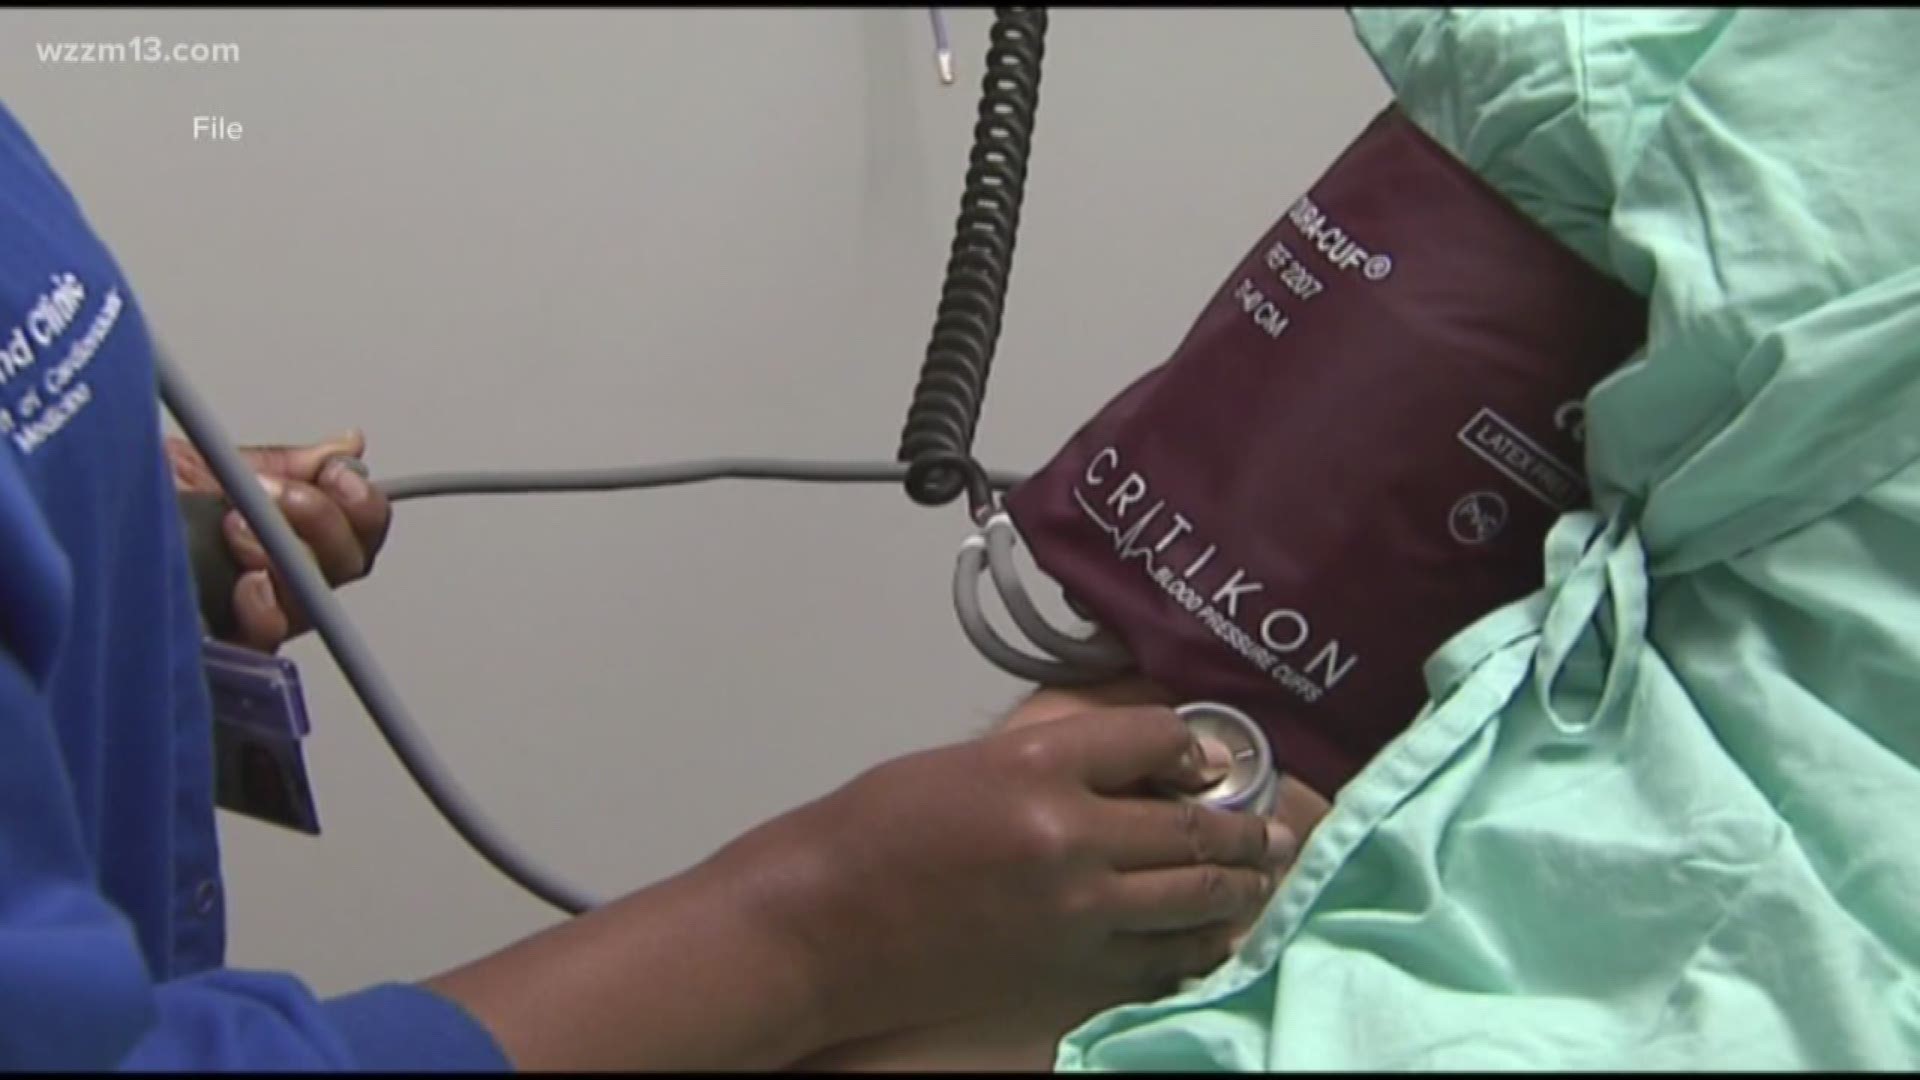 The American Heart Association is working to reduce heart disease within the black community in West Michigan.